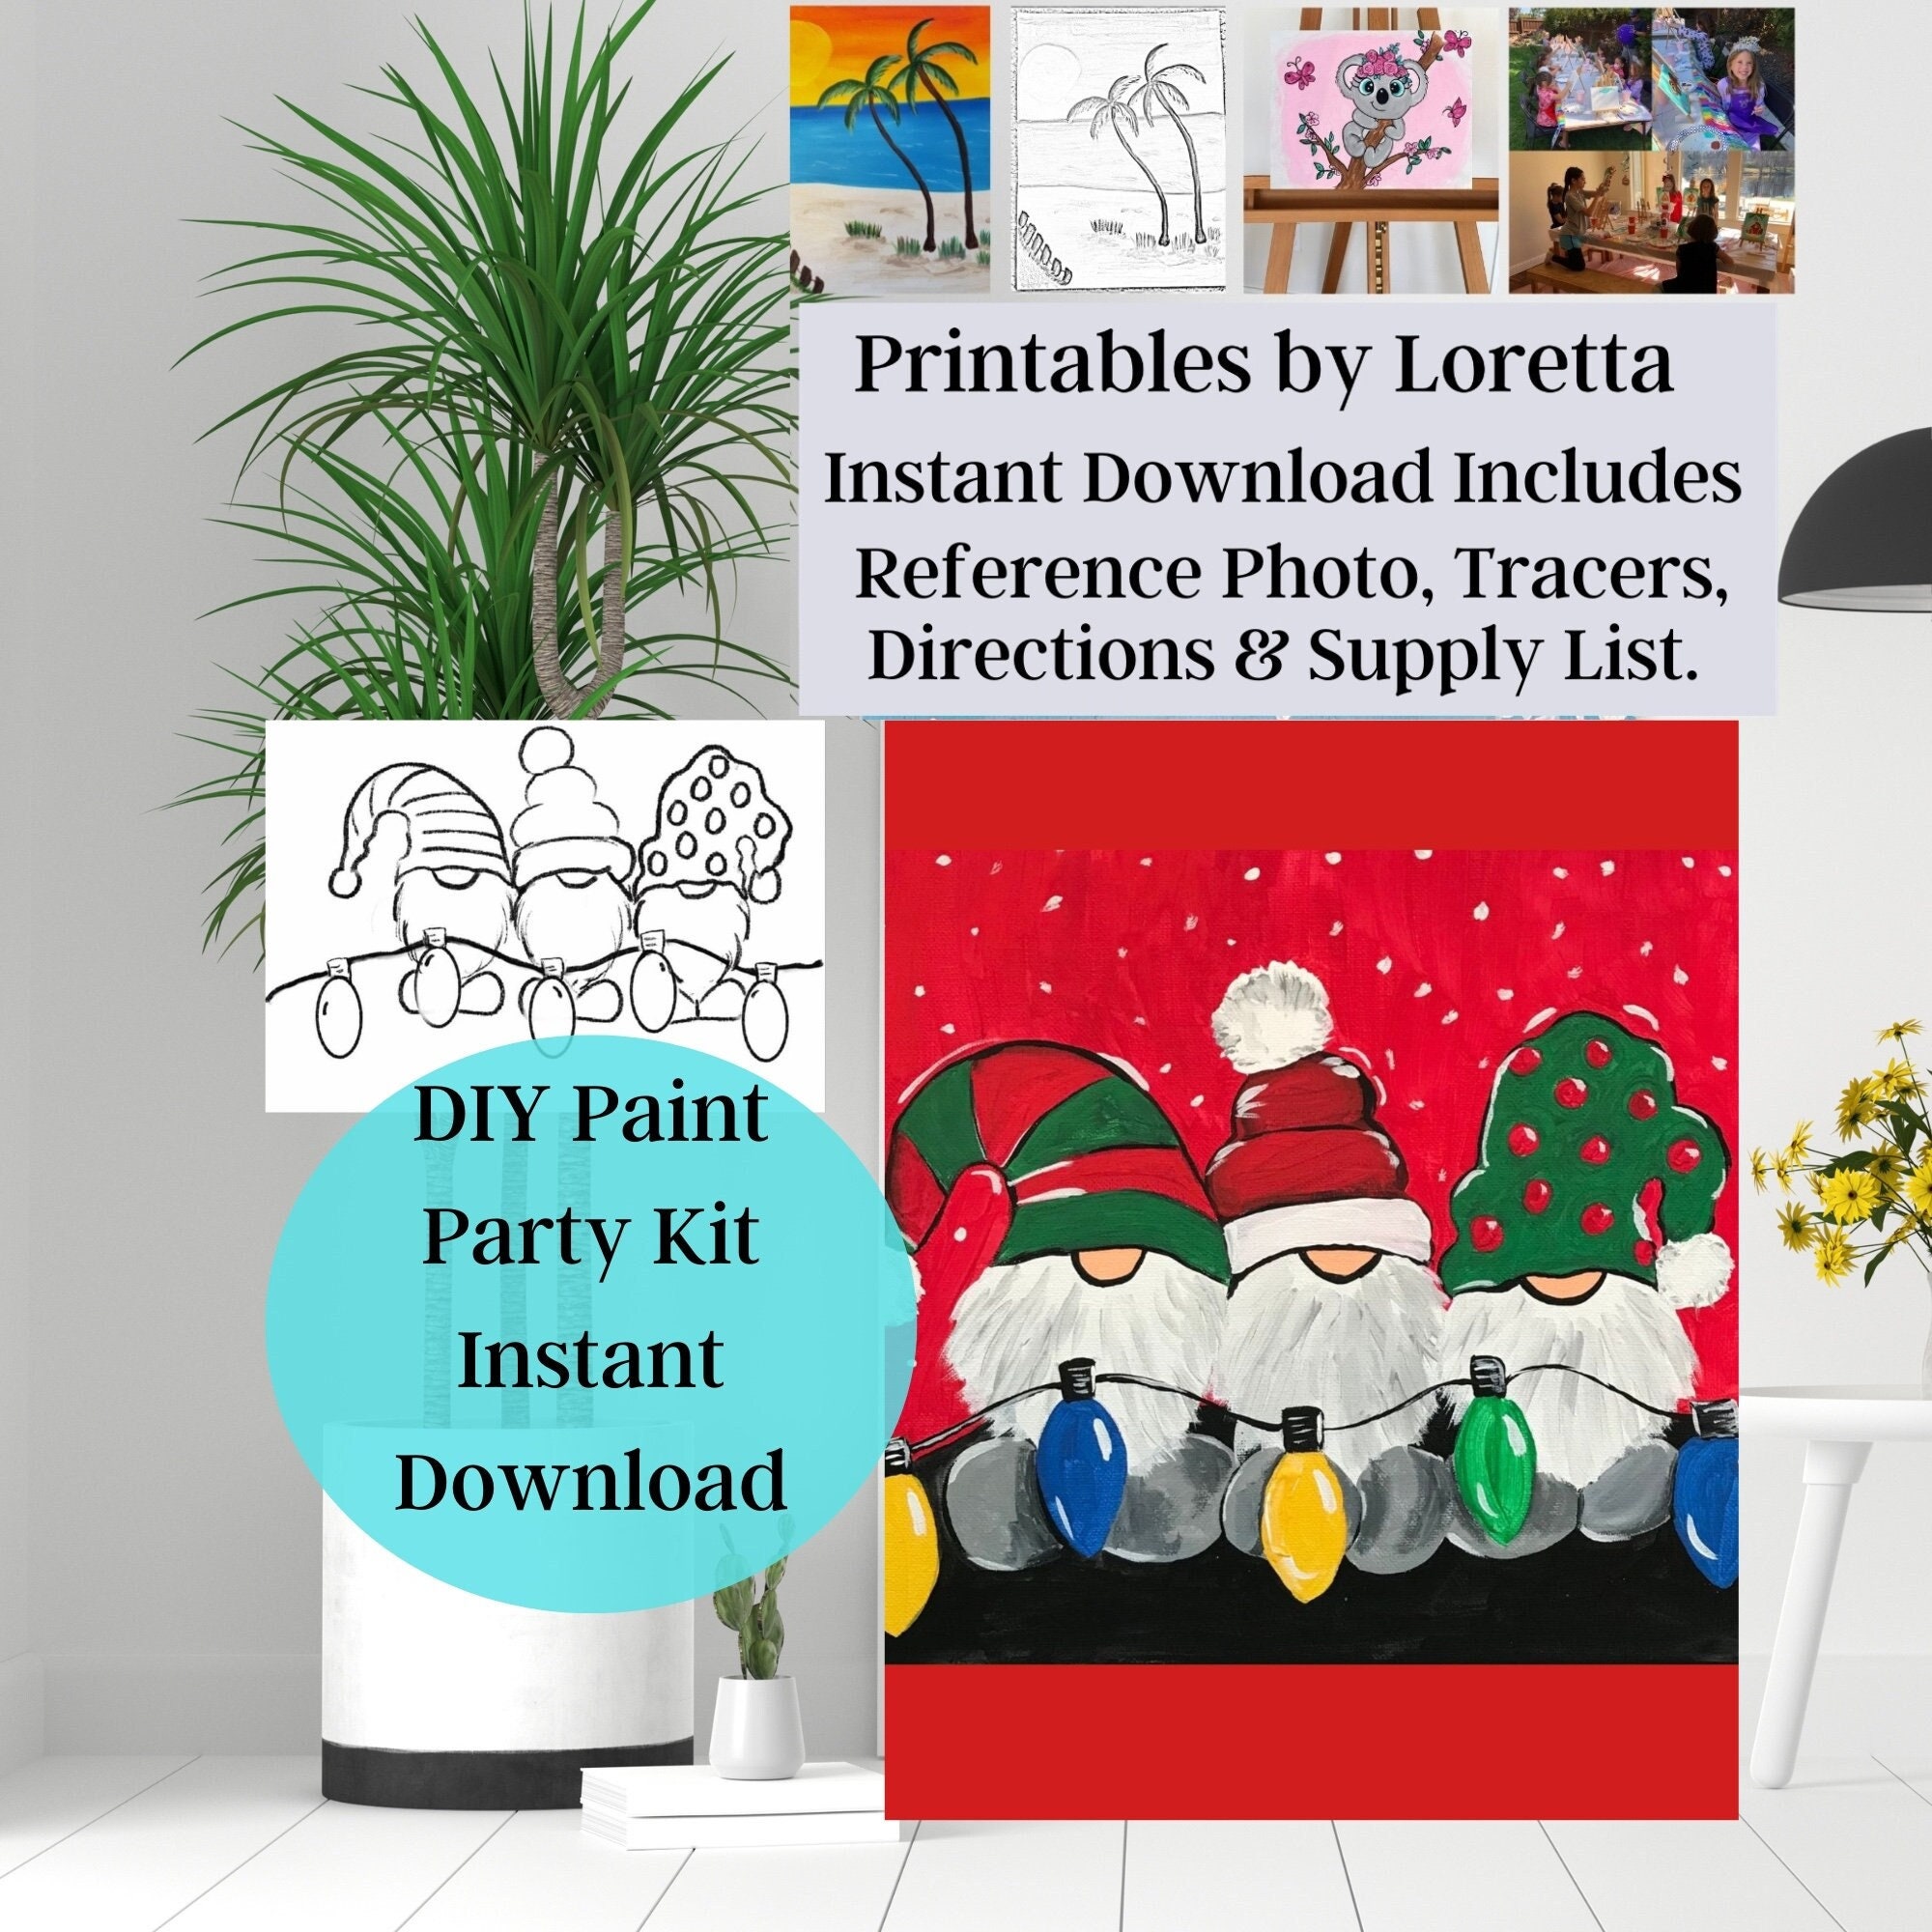 DIY Paint Party Kit Instant Download, Includes Tracer